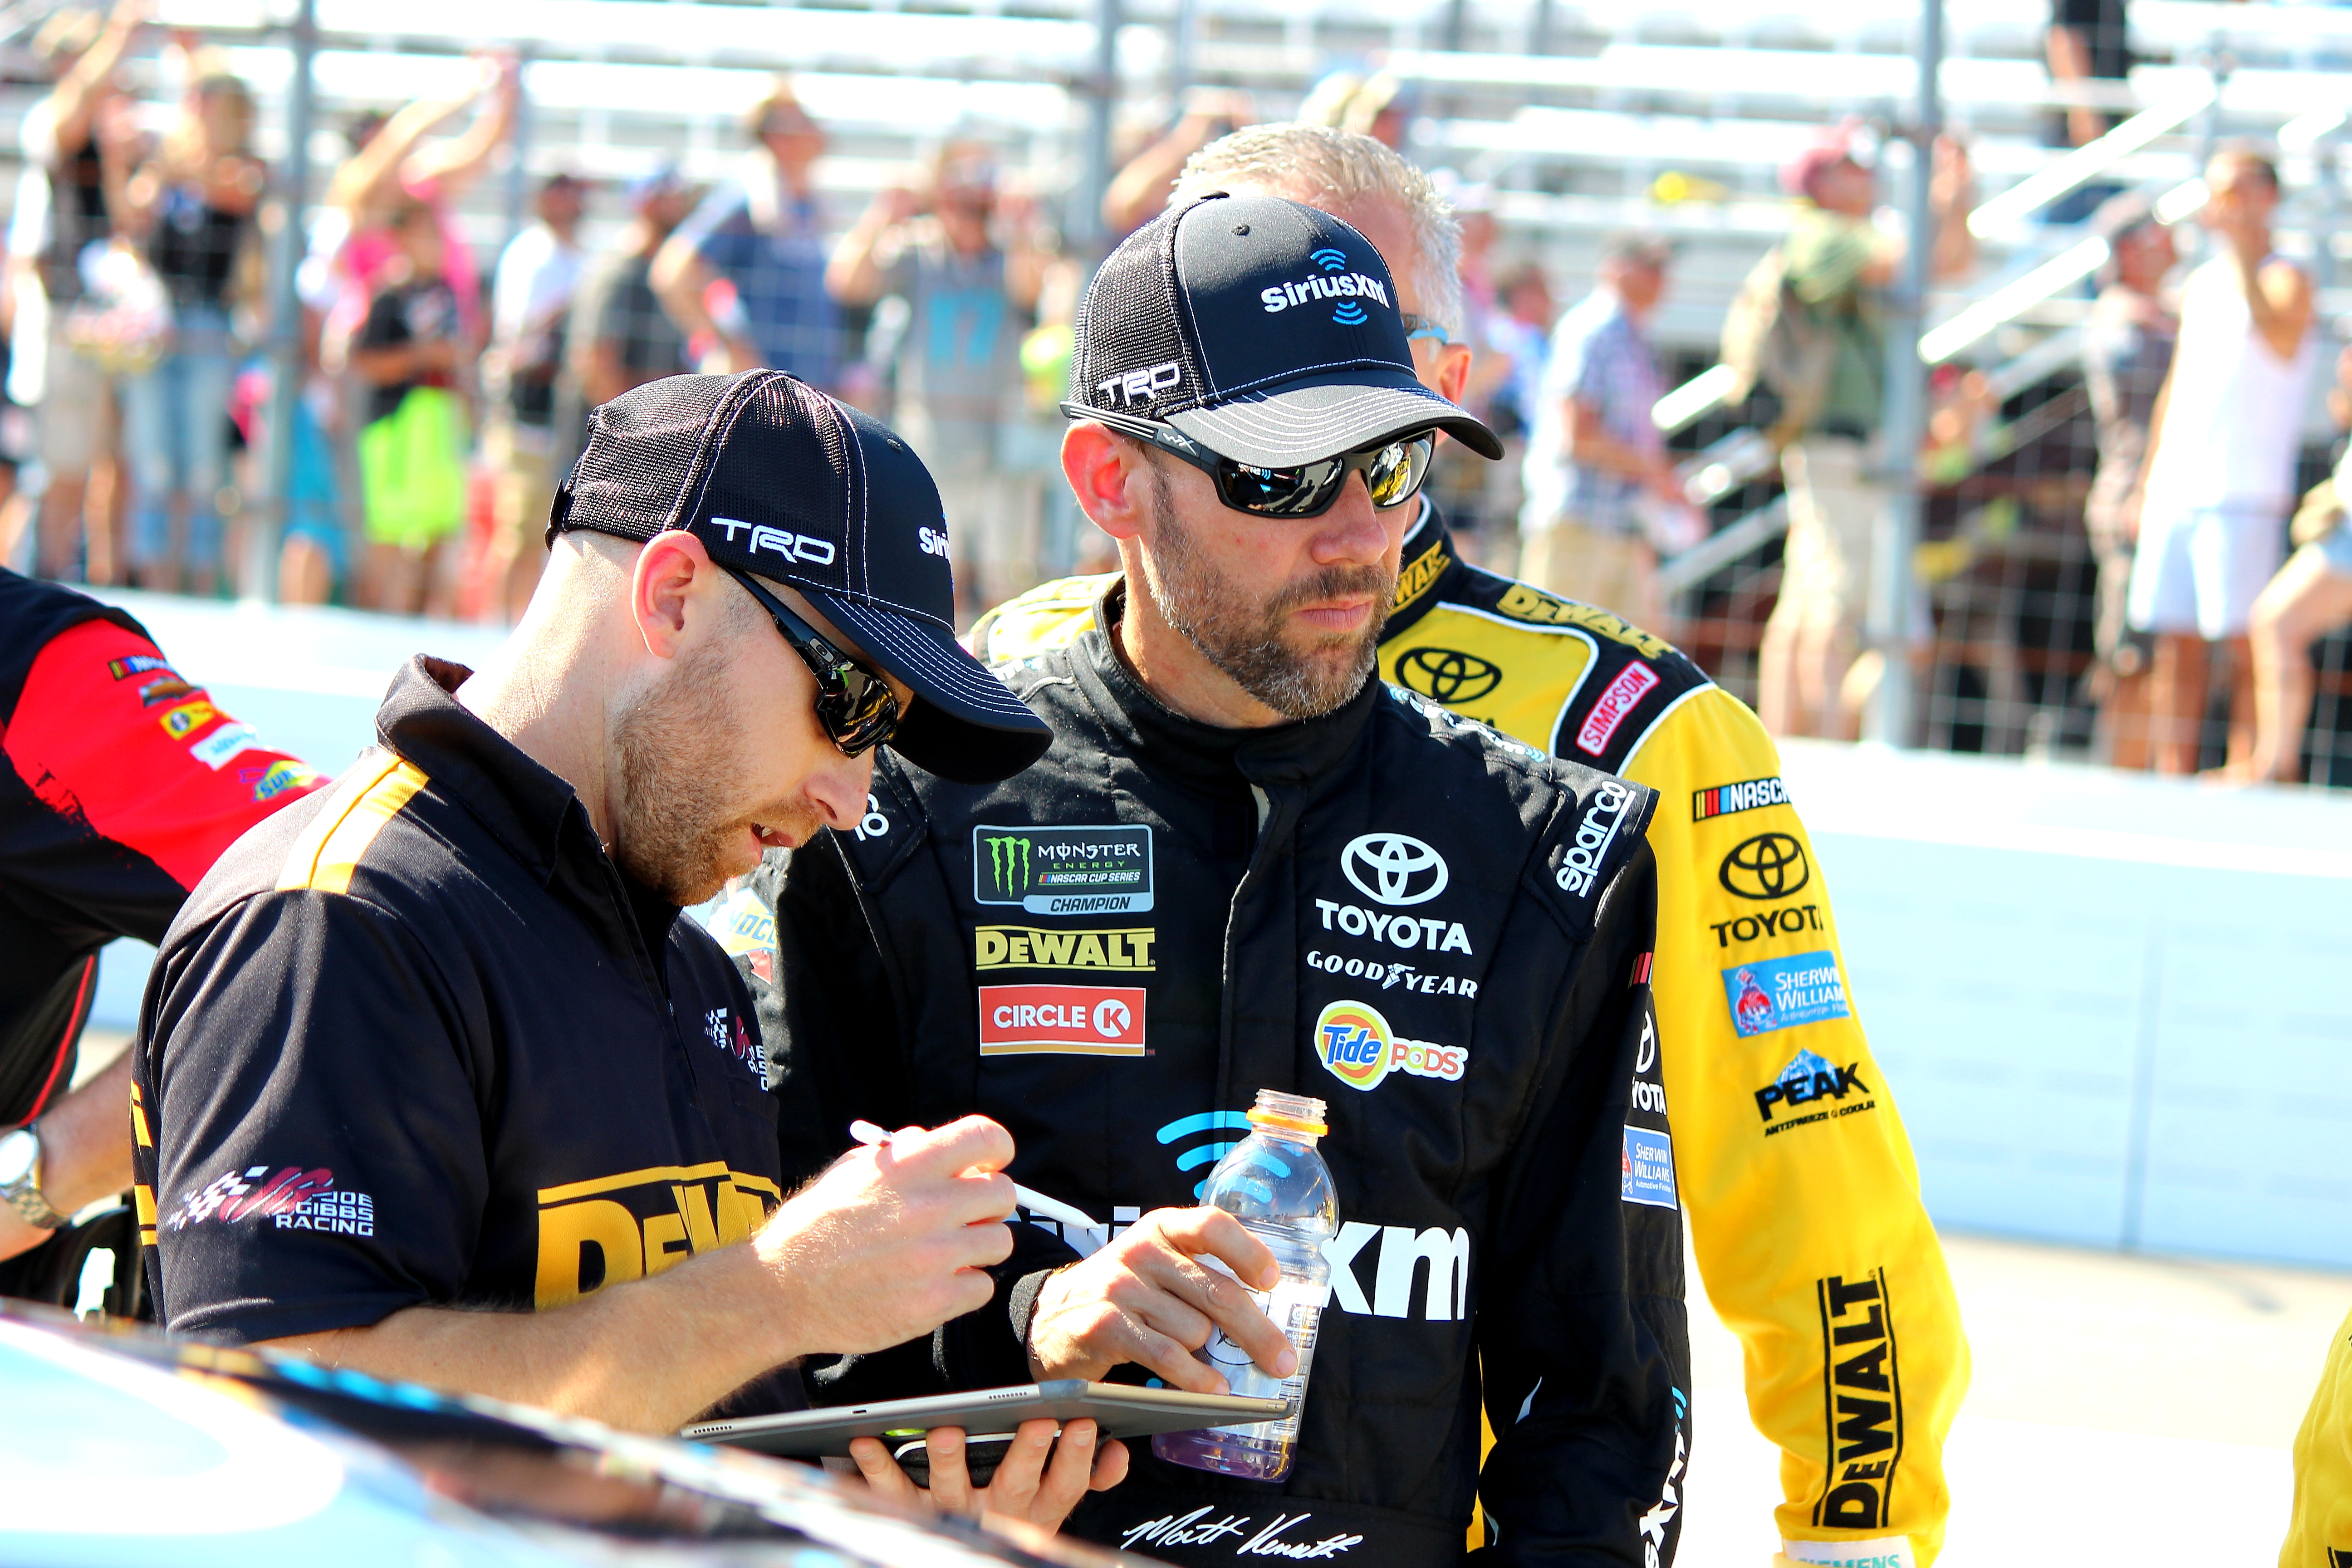 Above all, Kenseth doesn't concern himself too much with gamesmanship. (Photo Credit: Josh Jones)